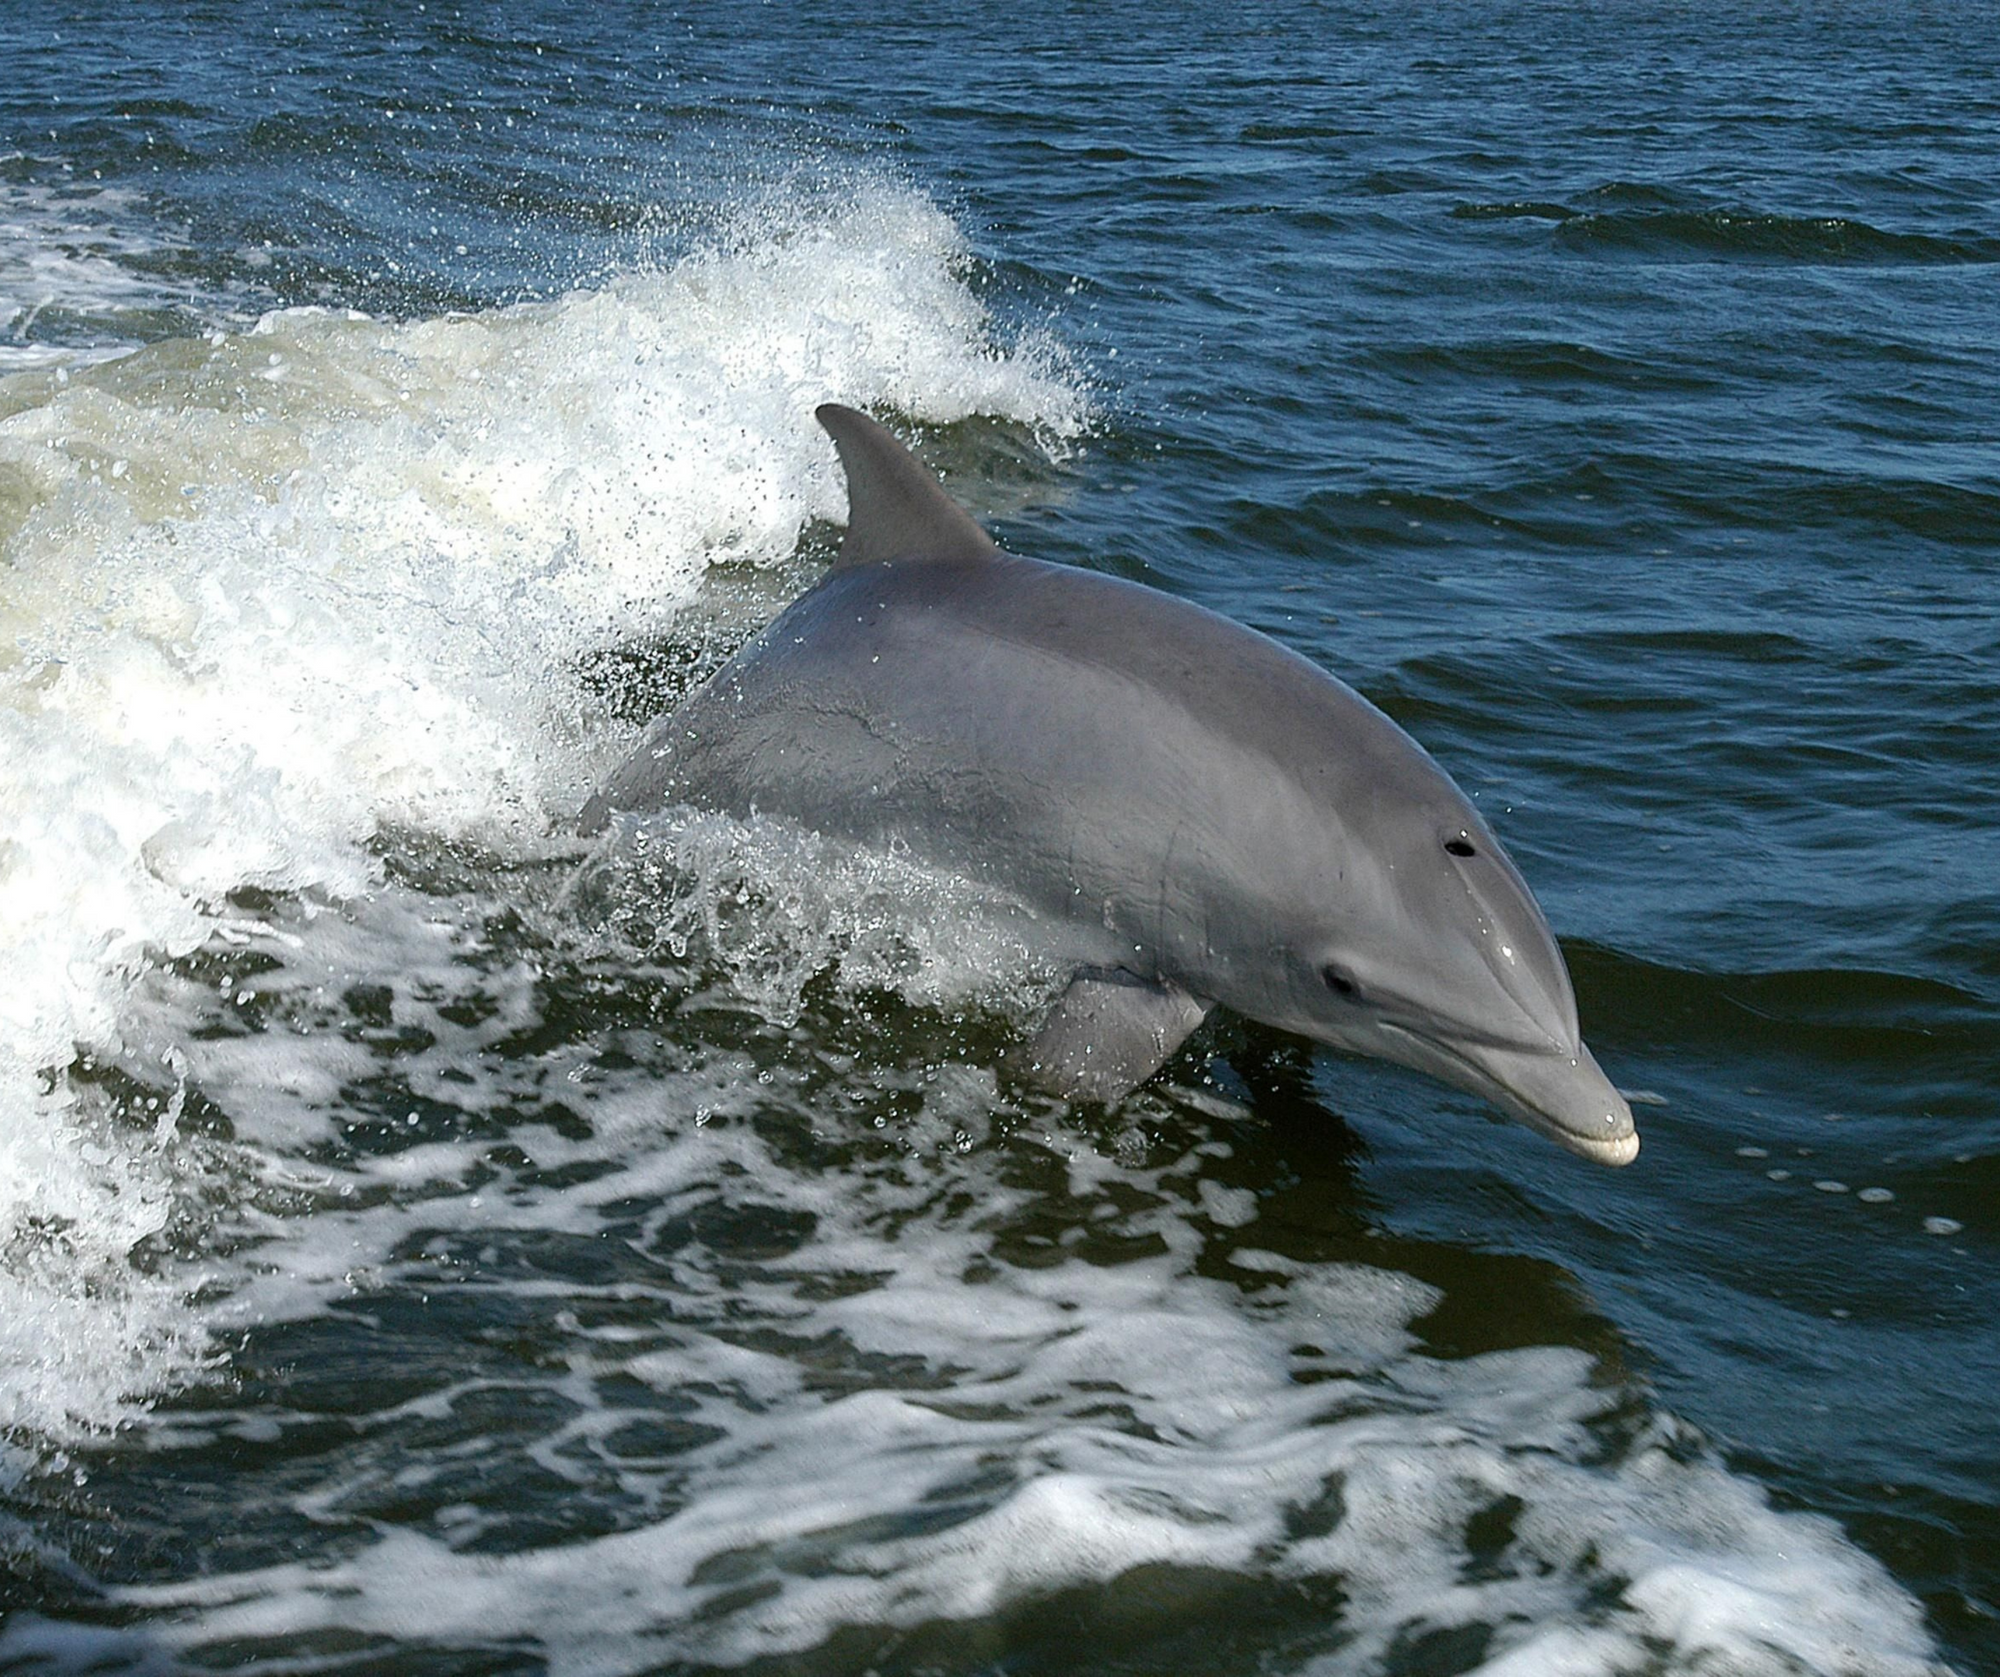 Protecting Precious Lives: France Enforces Unprecedented Fishing Ban in Bay of Biscay to Safeguard Dolphins